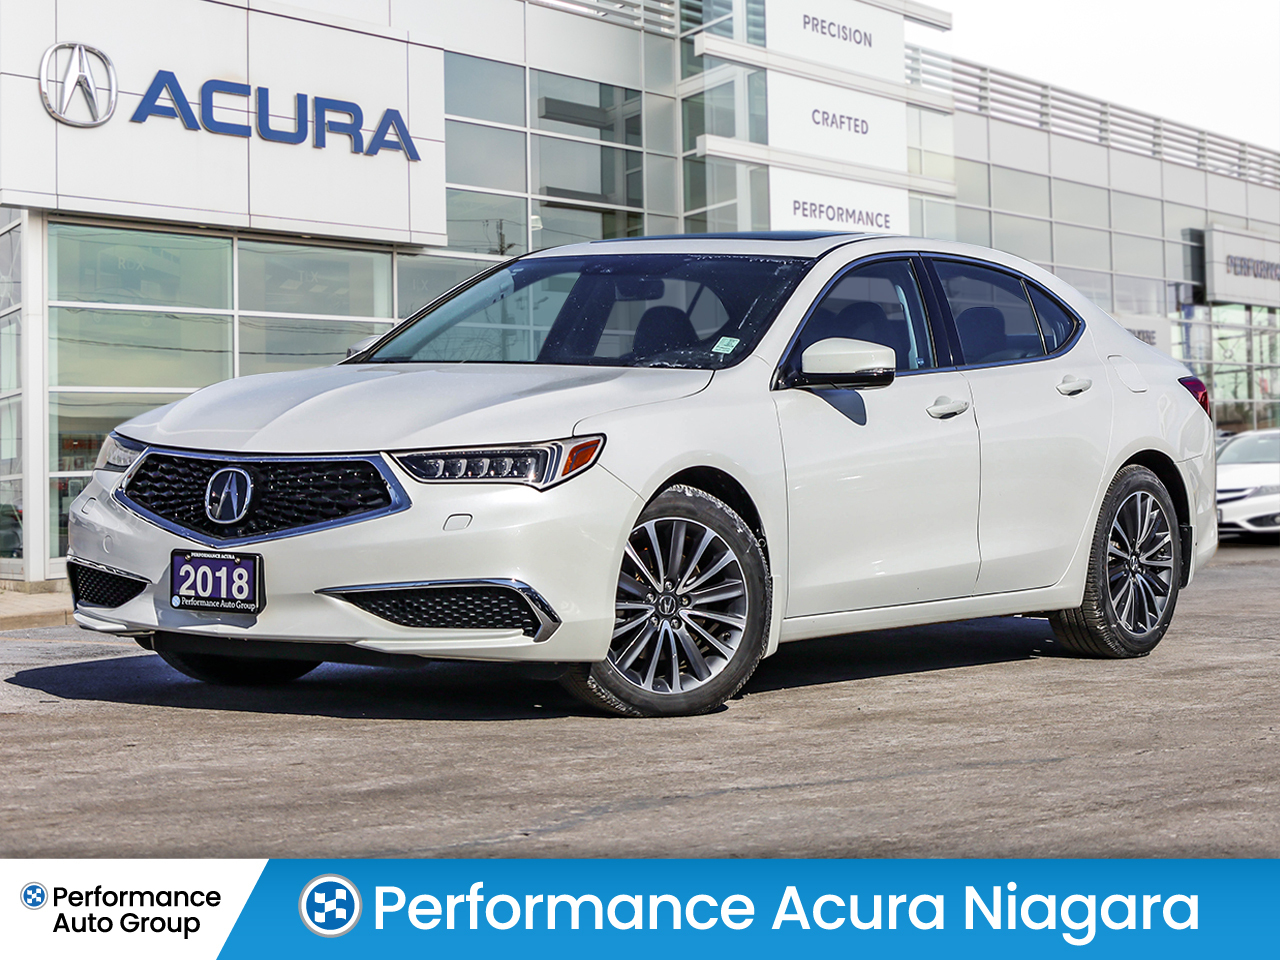 2018 Acura TLX SOLD - PENDING DELIVERY